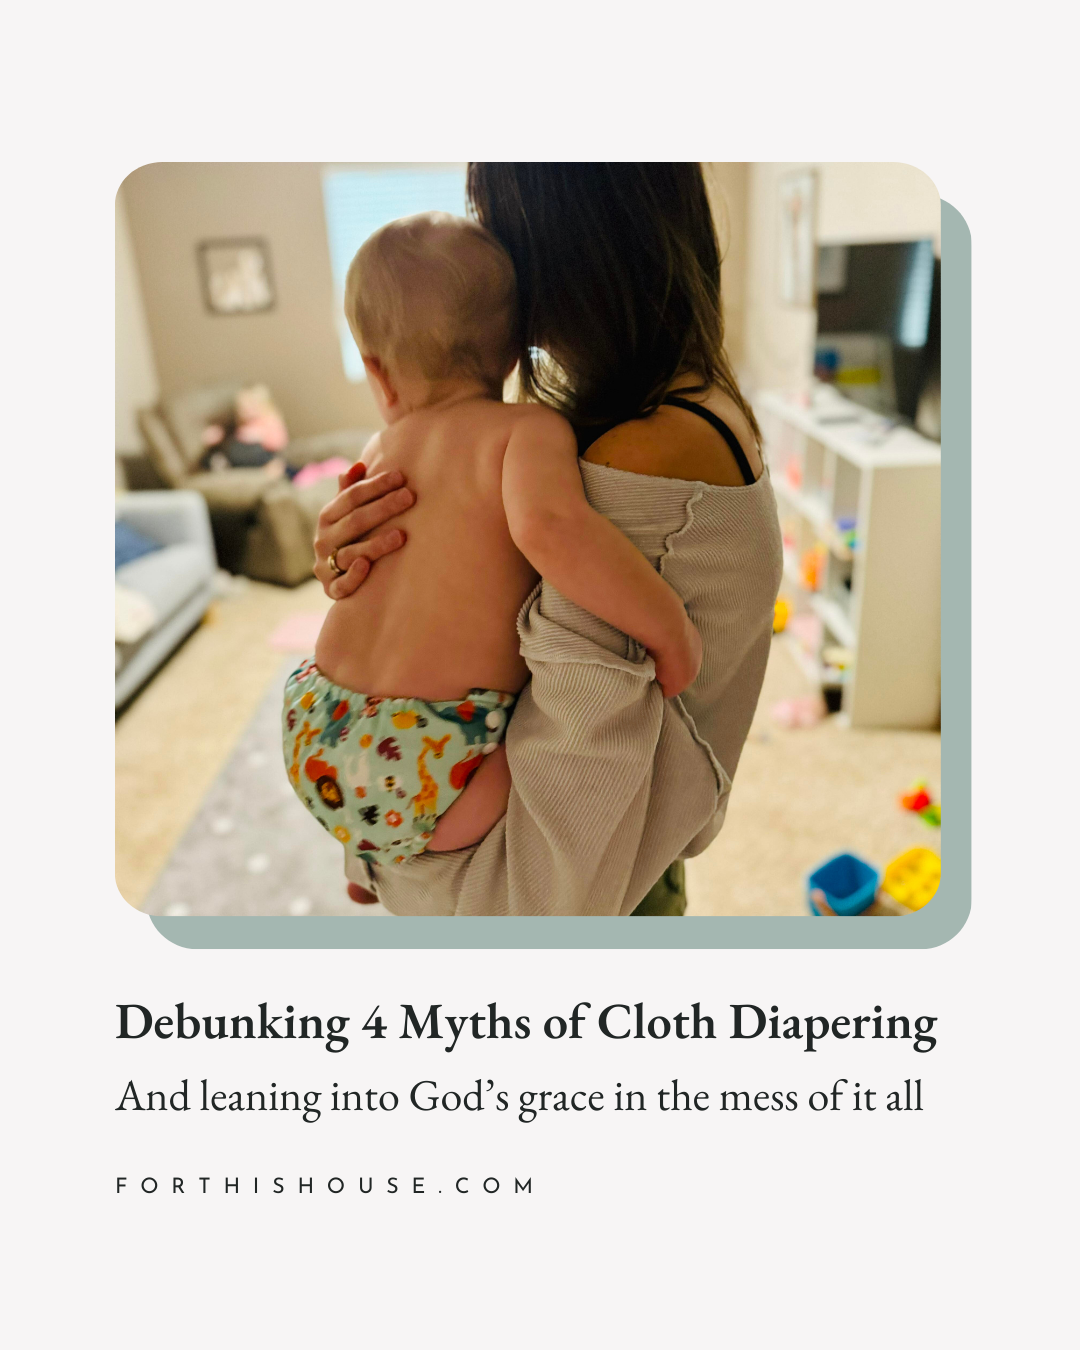 Debunking the myths of cloth diapering